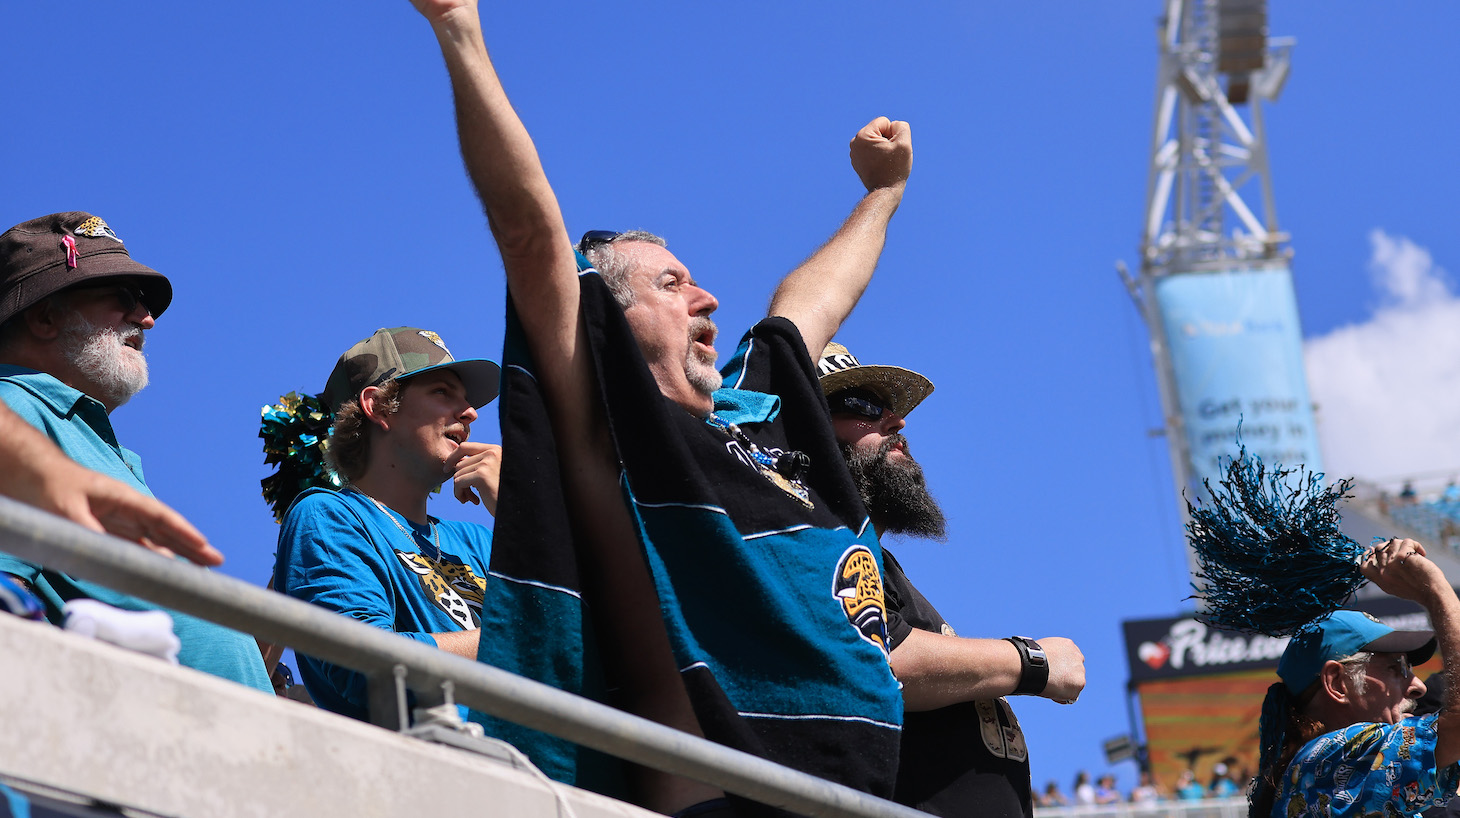 JACKSONVILLE, FLORIDA - OCTOBER 10: Jacksonville Jaguars fans react during the second quarter against the Tennessee Titans at TIAA Bank Field on October 10, 2021 in Jacksonville, Florida. (Photo by Sam Greenwood/Getty Images)